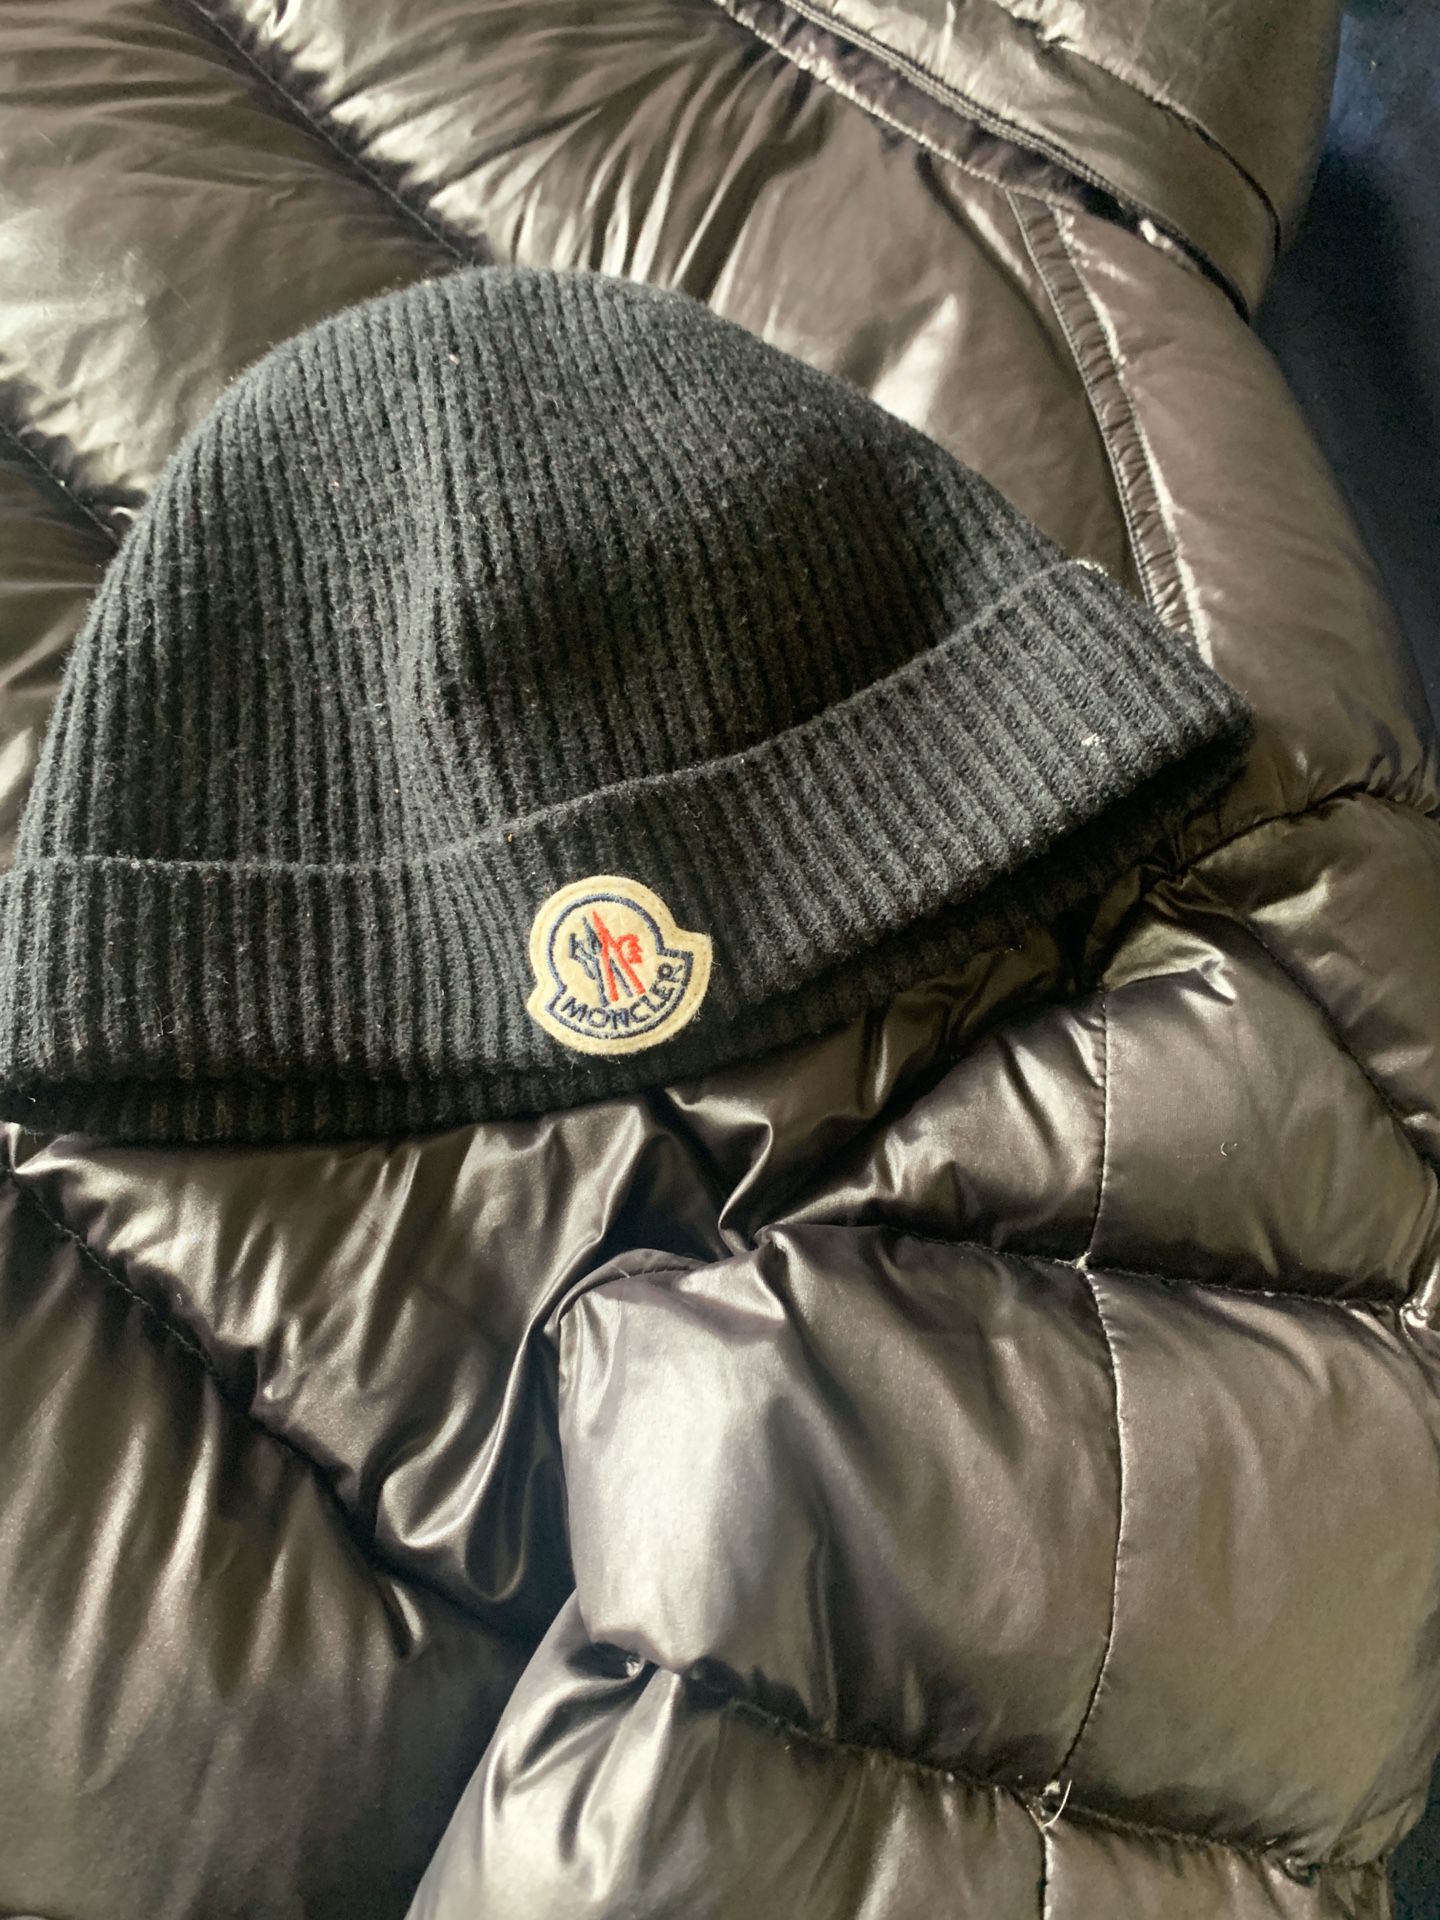 Moncler jacket and hat